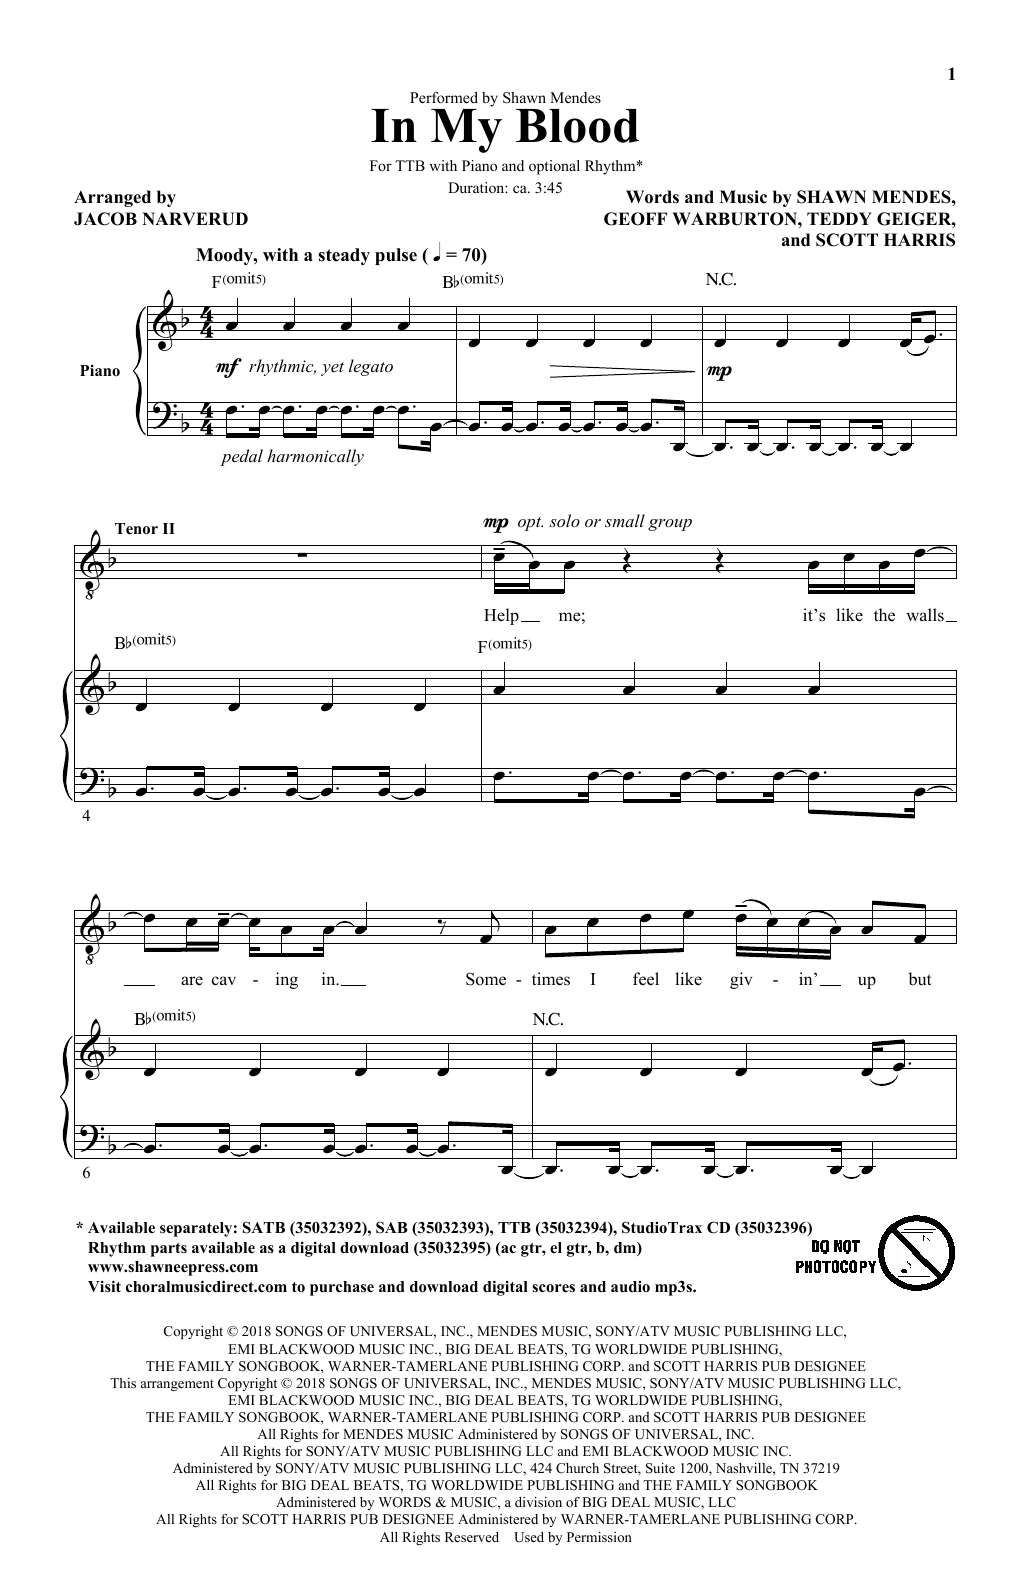 Download Shawn Mendes In My Blood (arr. Jacob Narverud) Sheet Music